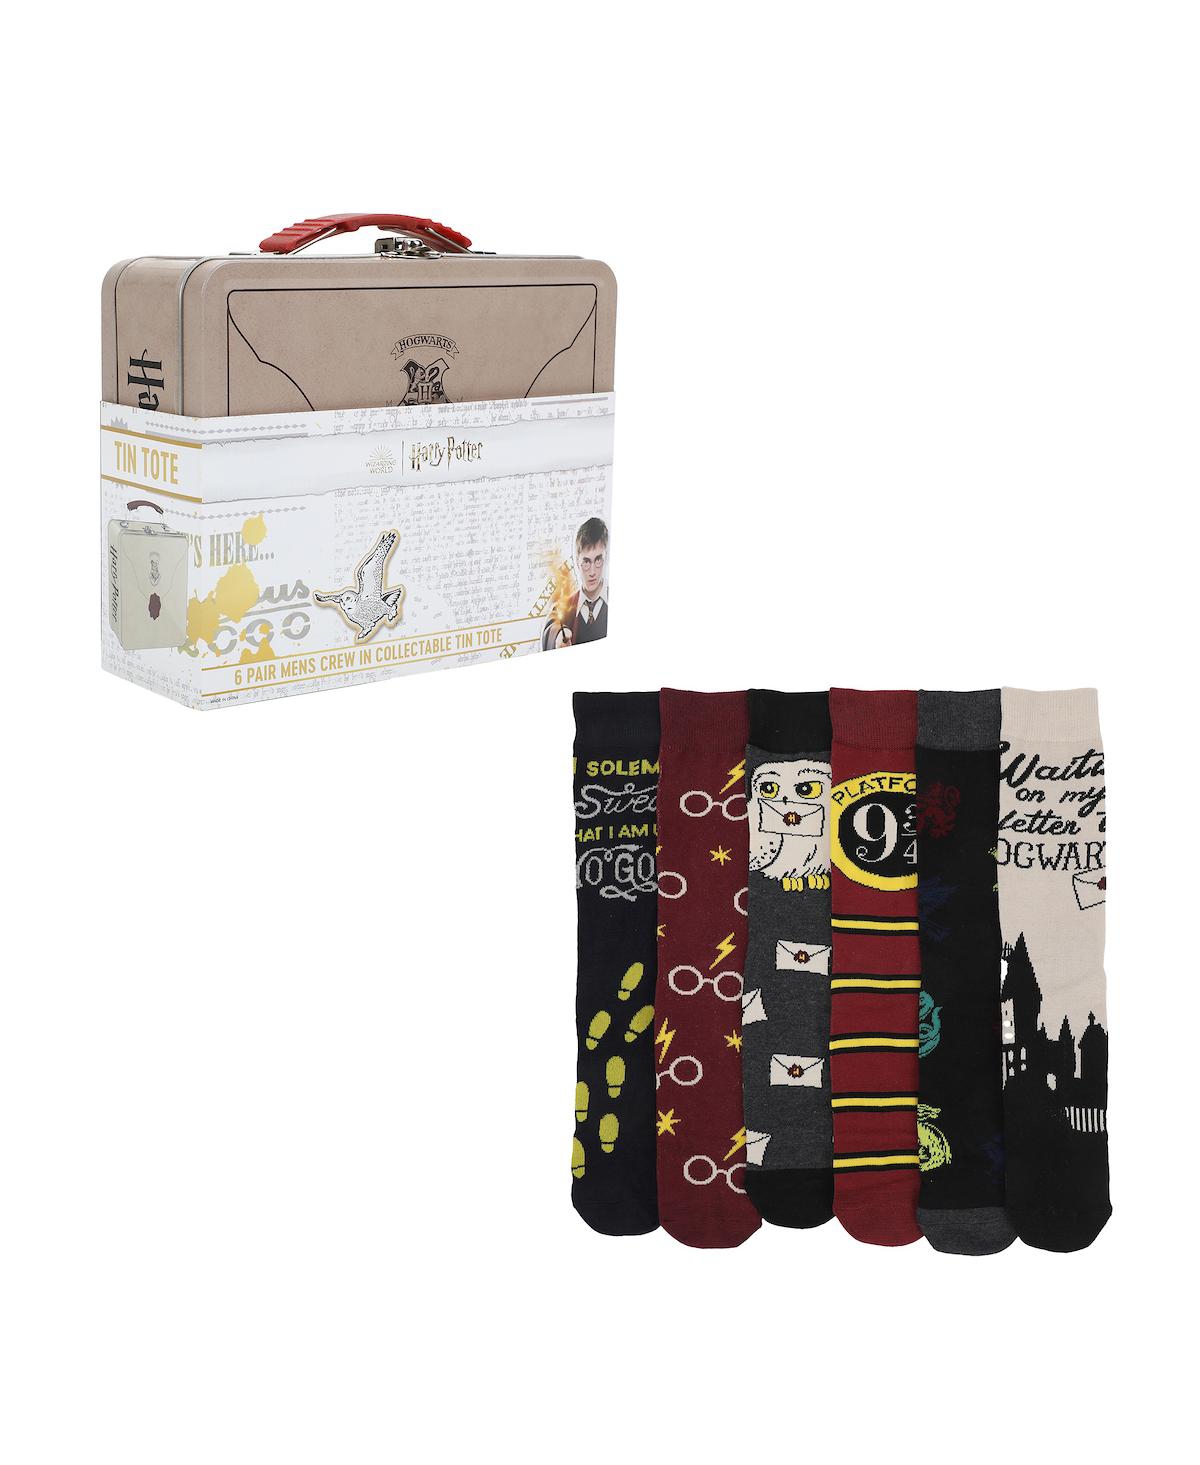 Men's Waiting On My Letter To Hogwarts Adult 6-Pair Casual Crew Socks with Tin Tote - Multicolored